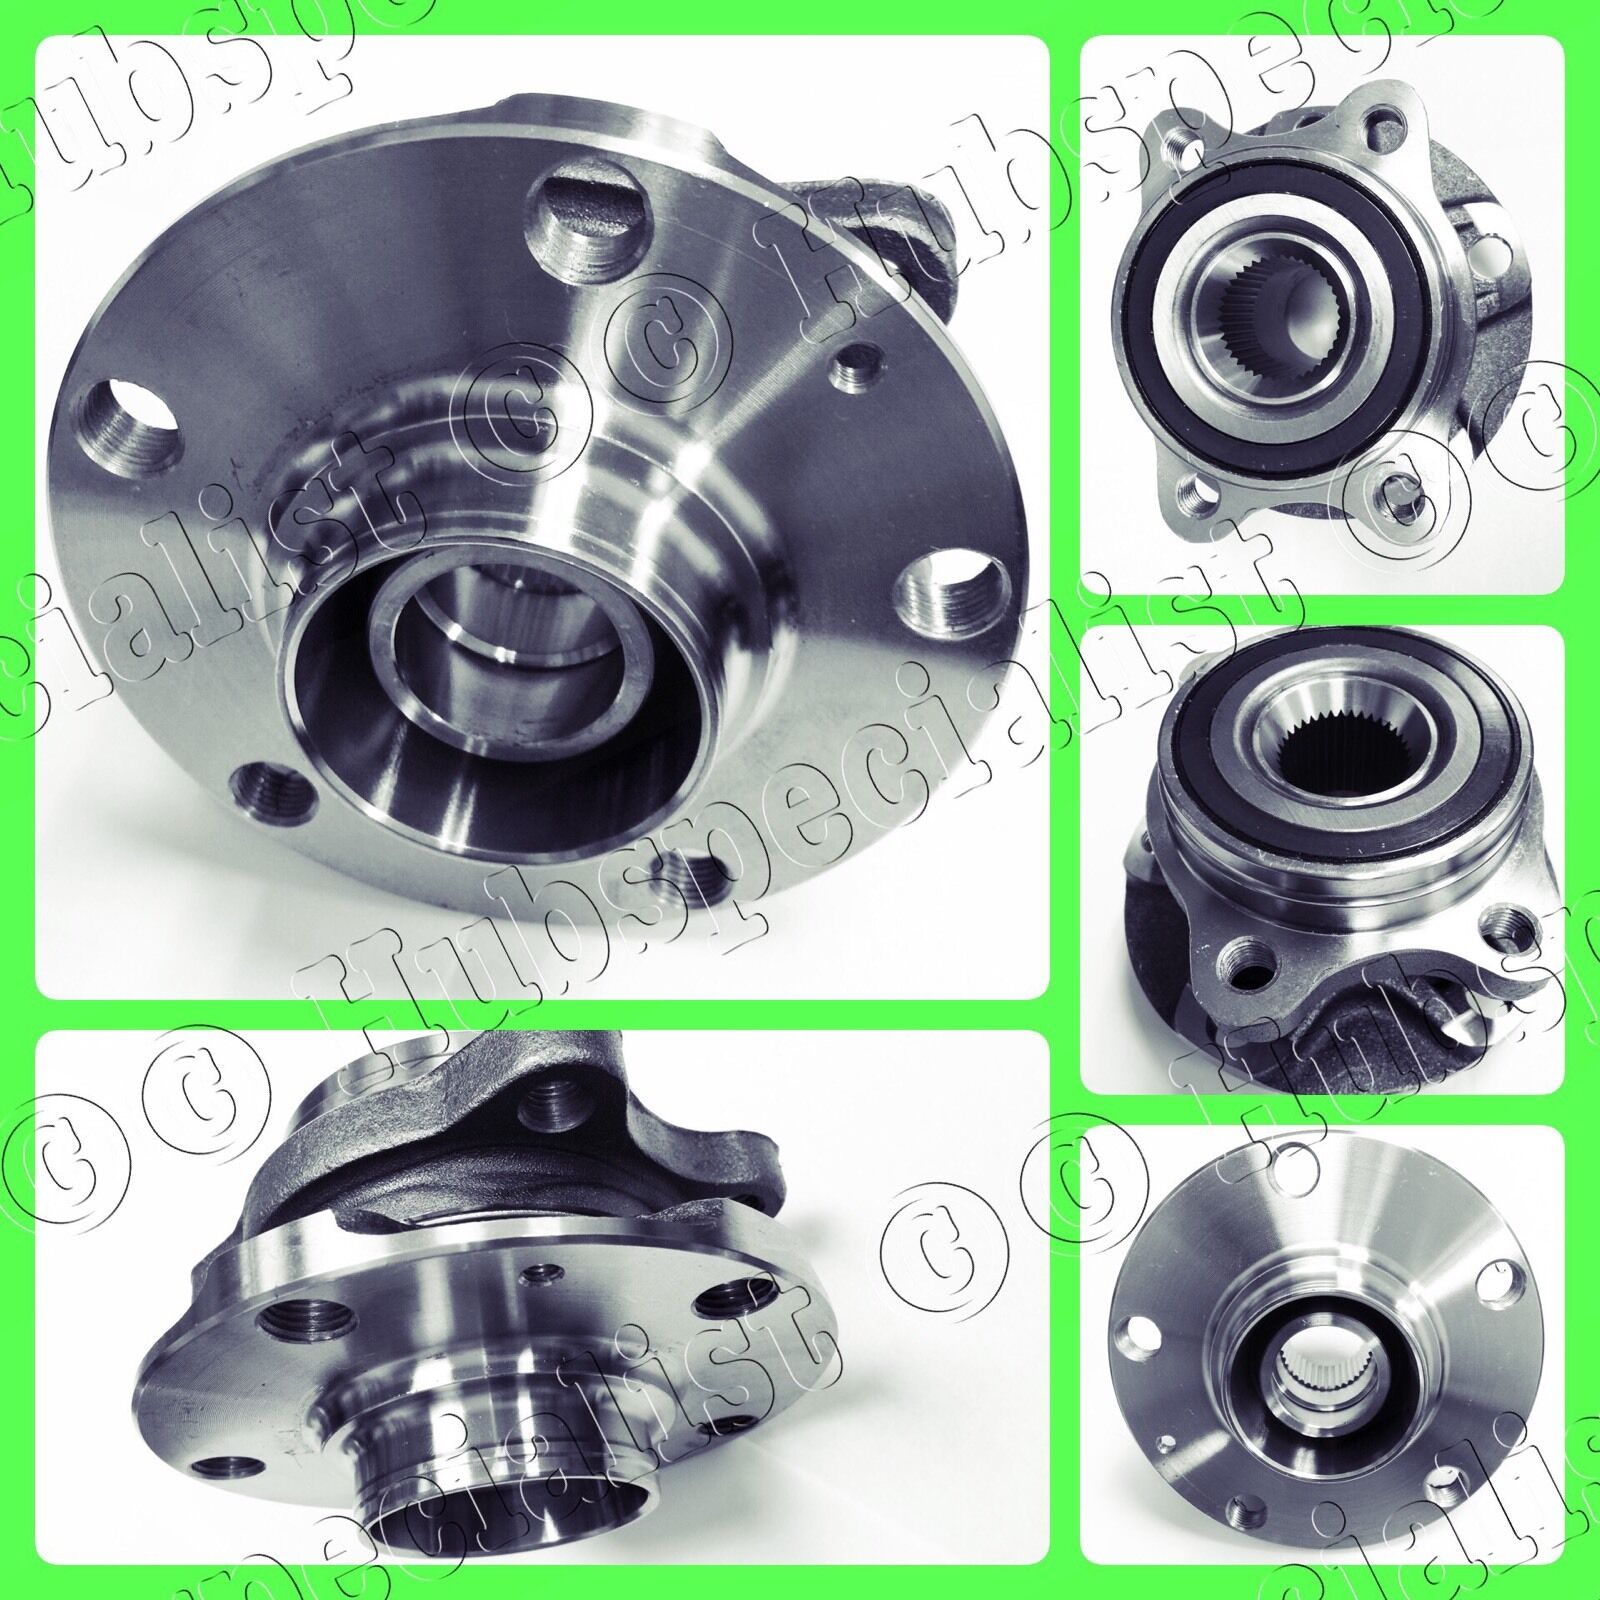 REAR WHEEL HUB BEARING ASSEMBLY FOR 2005-2011 AUDI A6-QUATTRO V8 ONLY 1SIDE NEW 